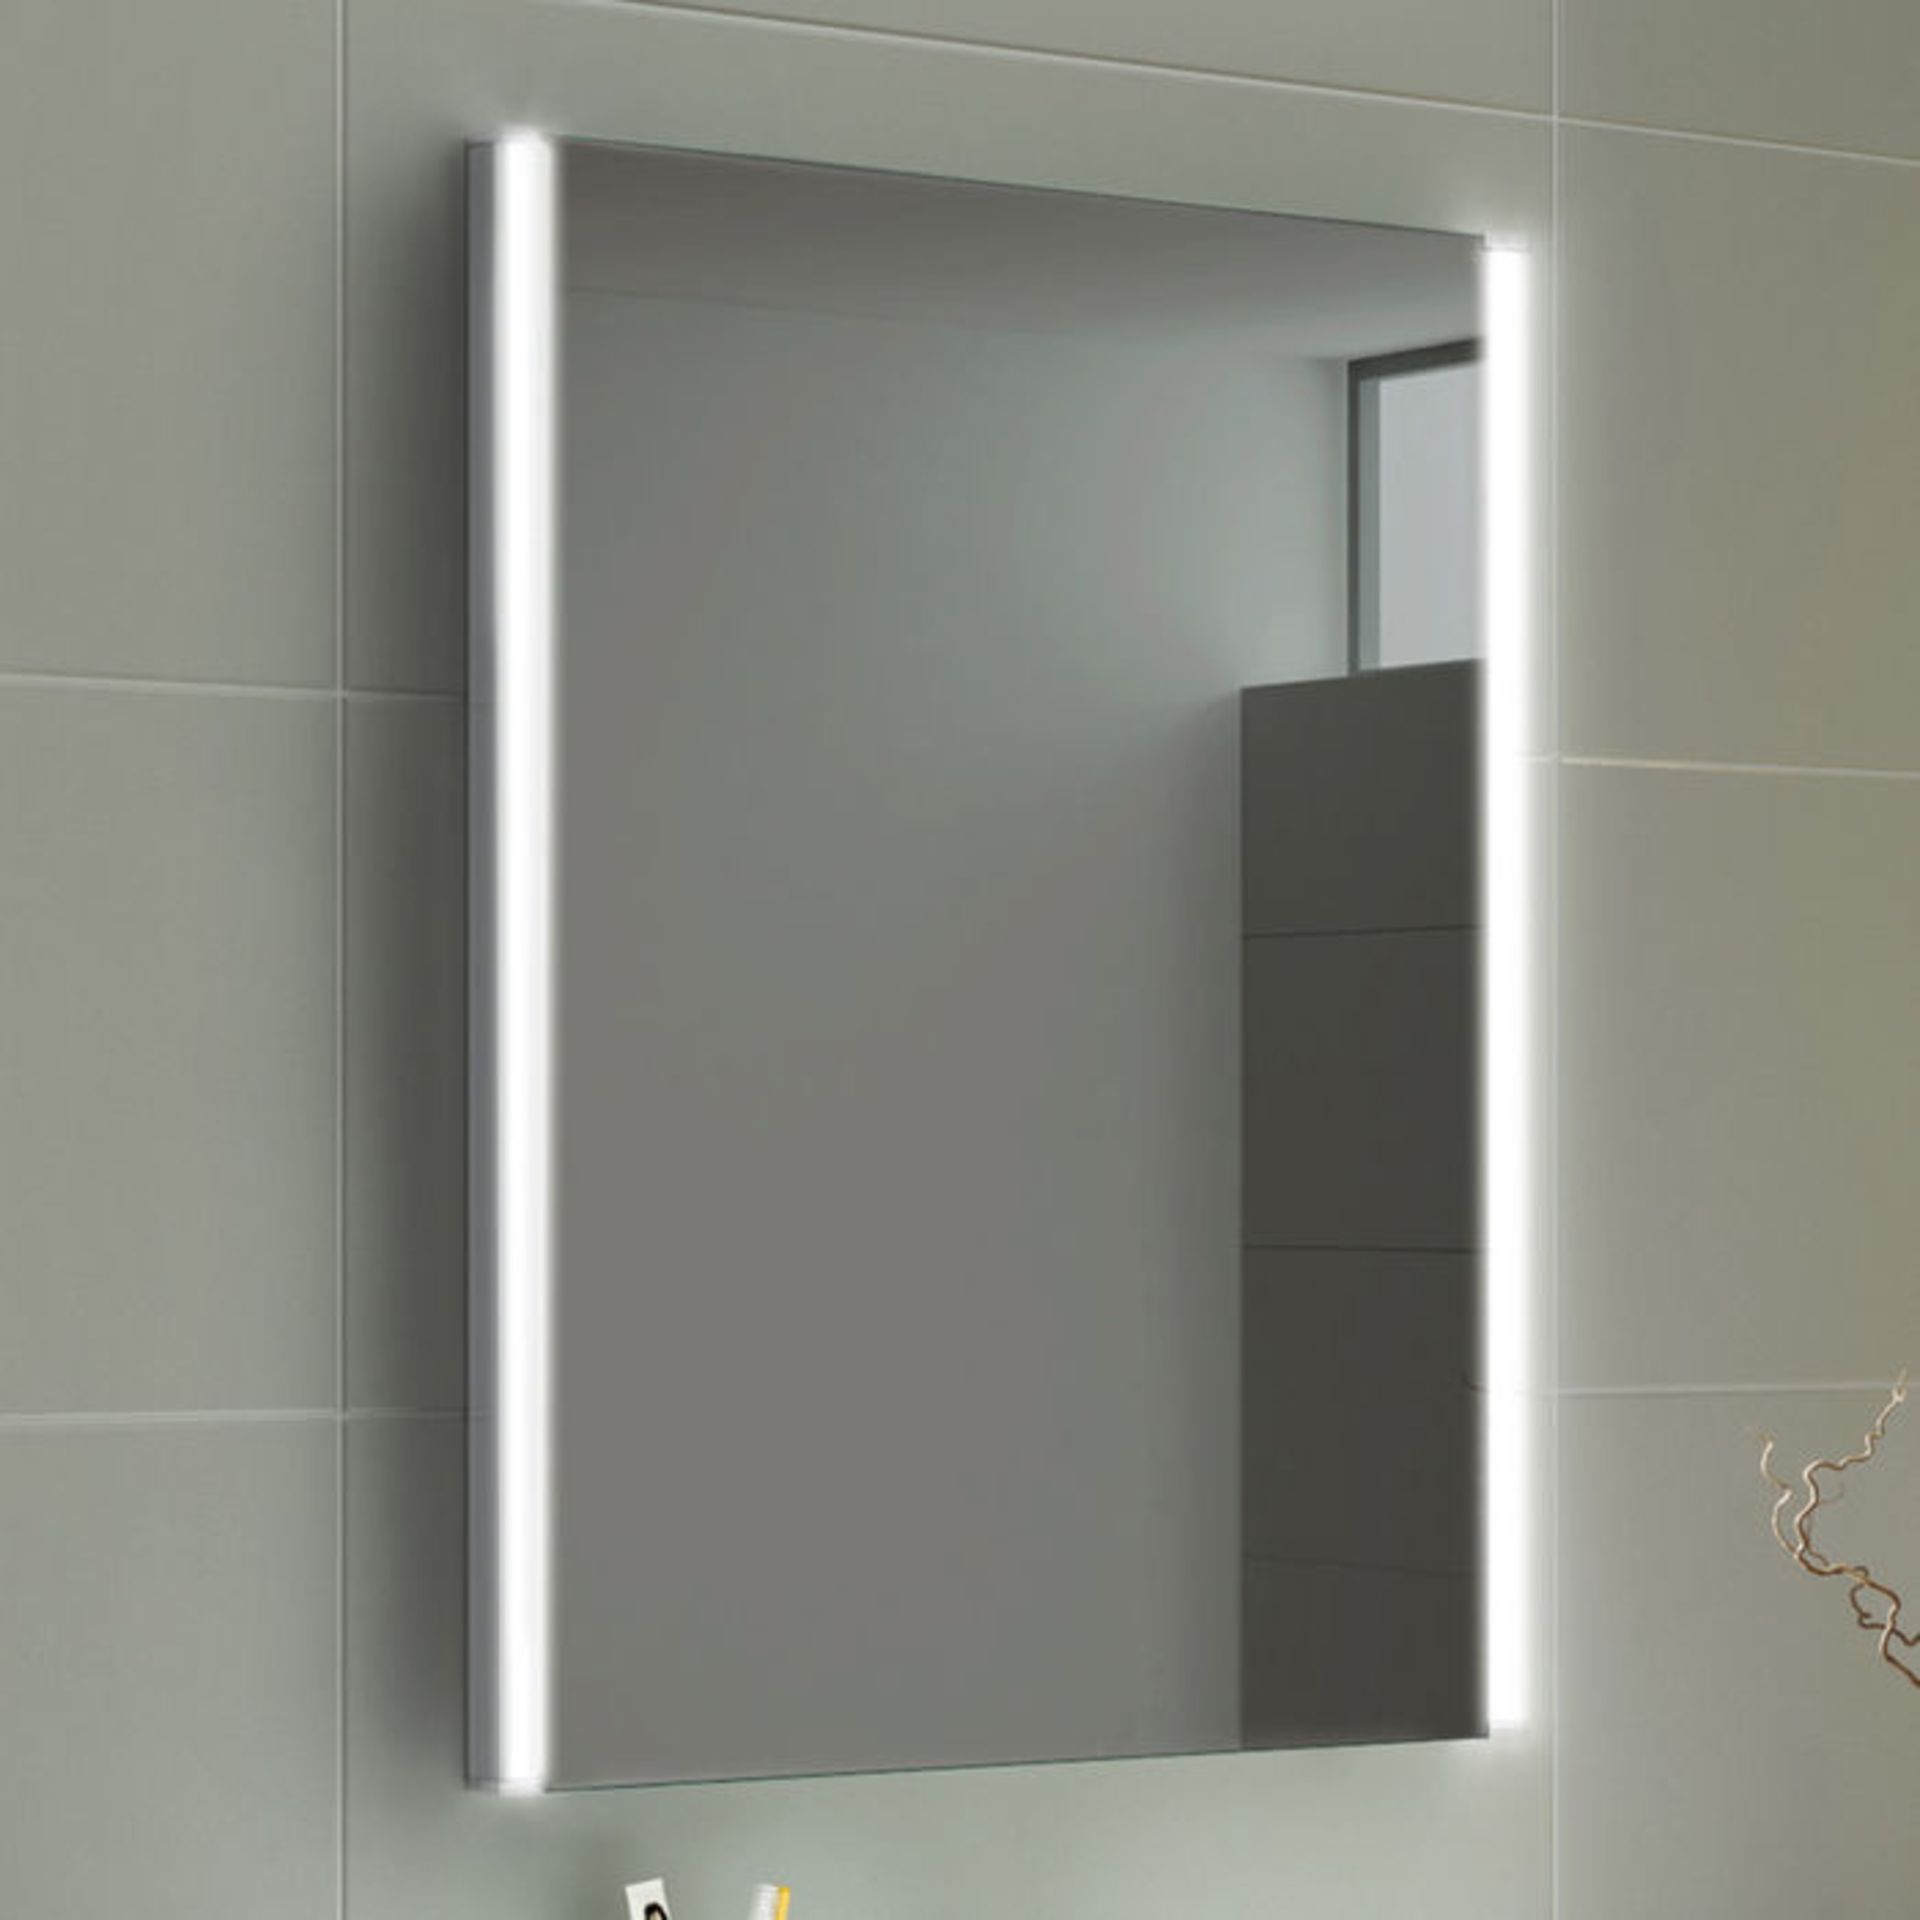 (ZA178) 500x700mm Denver LED Mirror - Battery Operated. Energy saving controlled On / Off switch